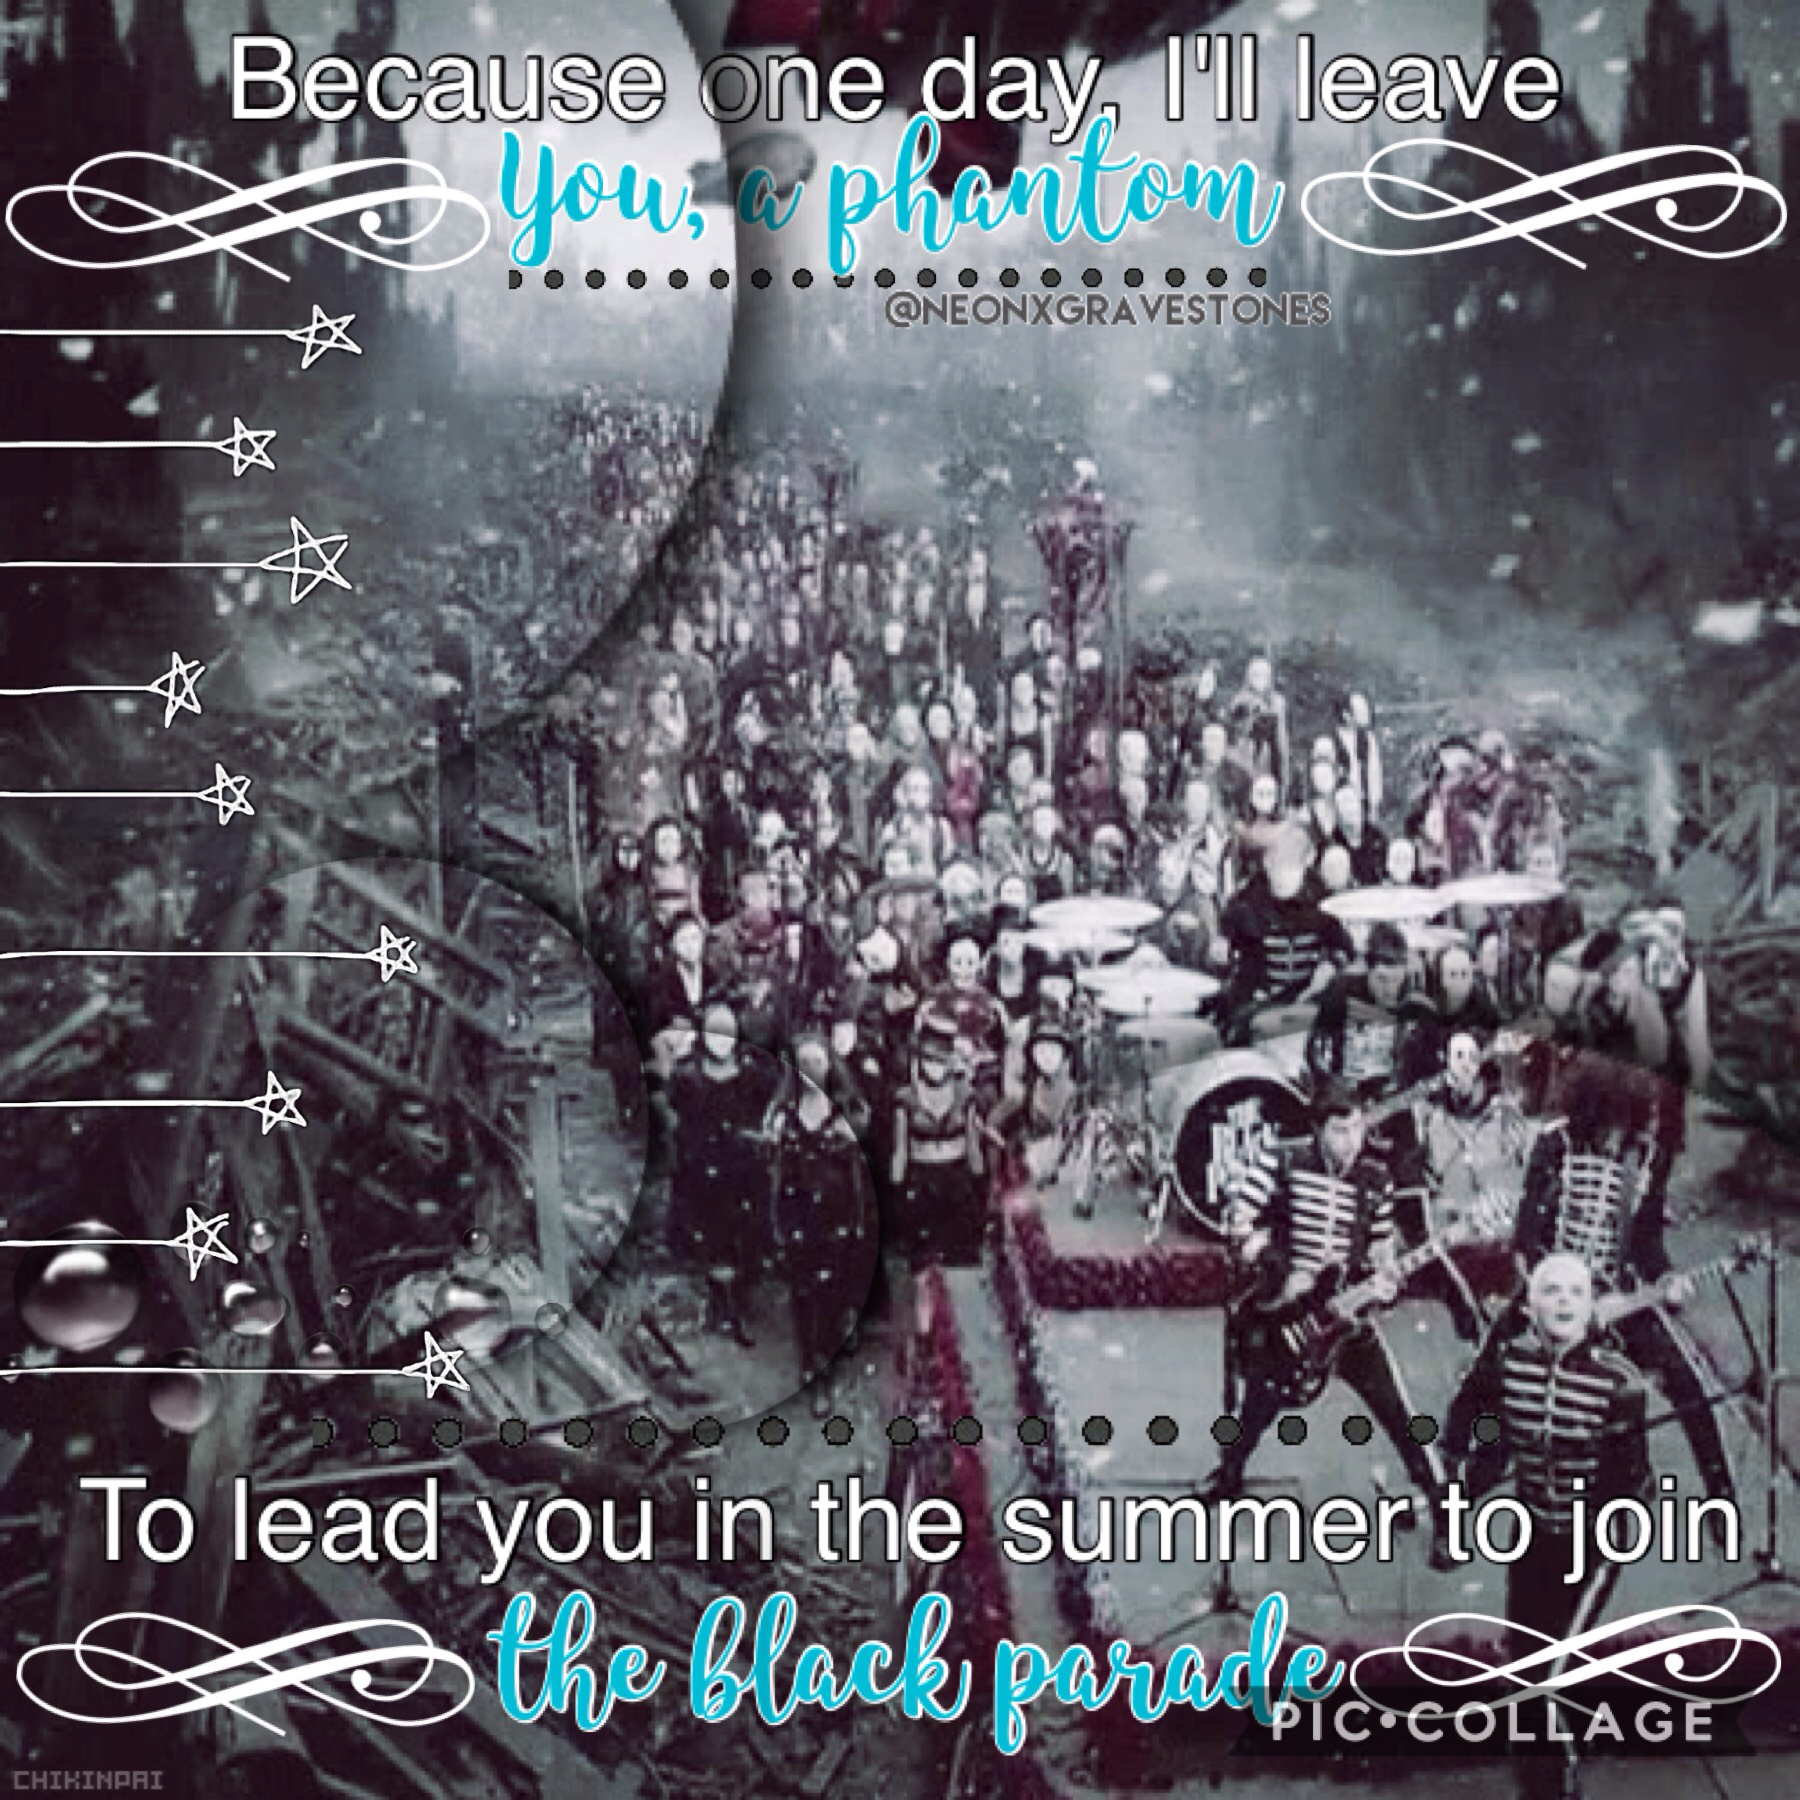 💔Welcome To The Black Parade: My Chemical Romance💔



So I had to repost this and another collage because 1, it got deleted and 2, it was blurry